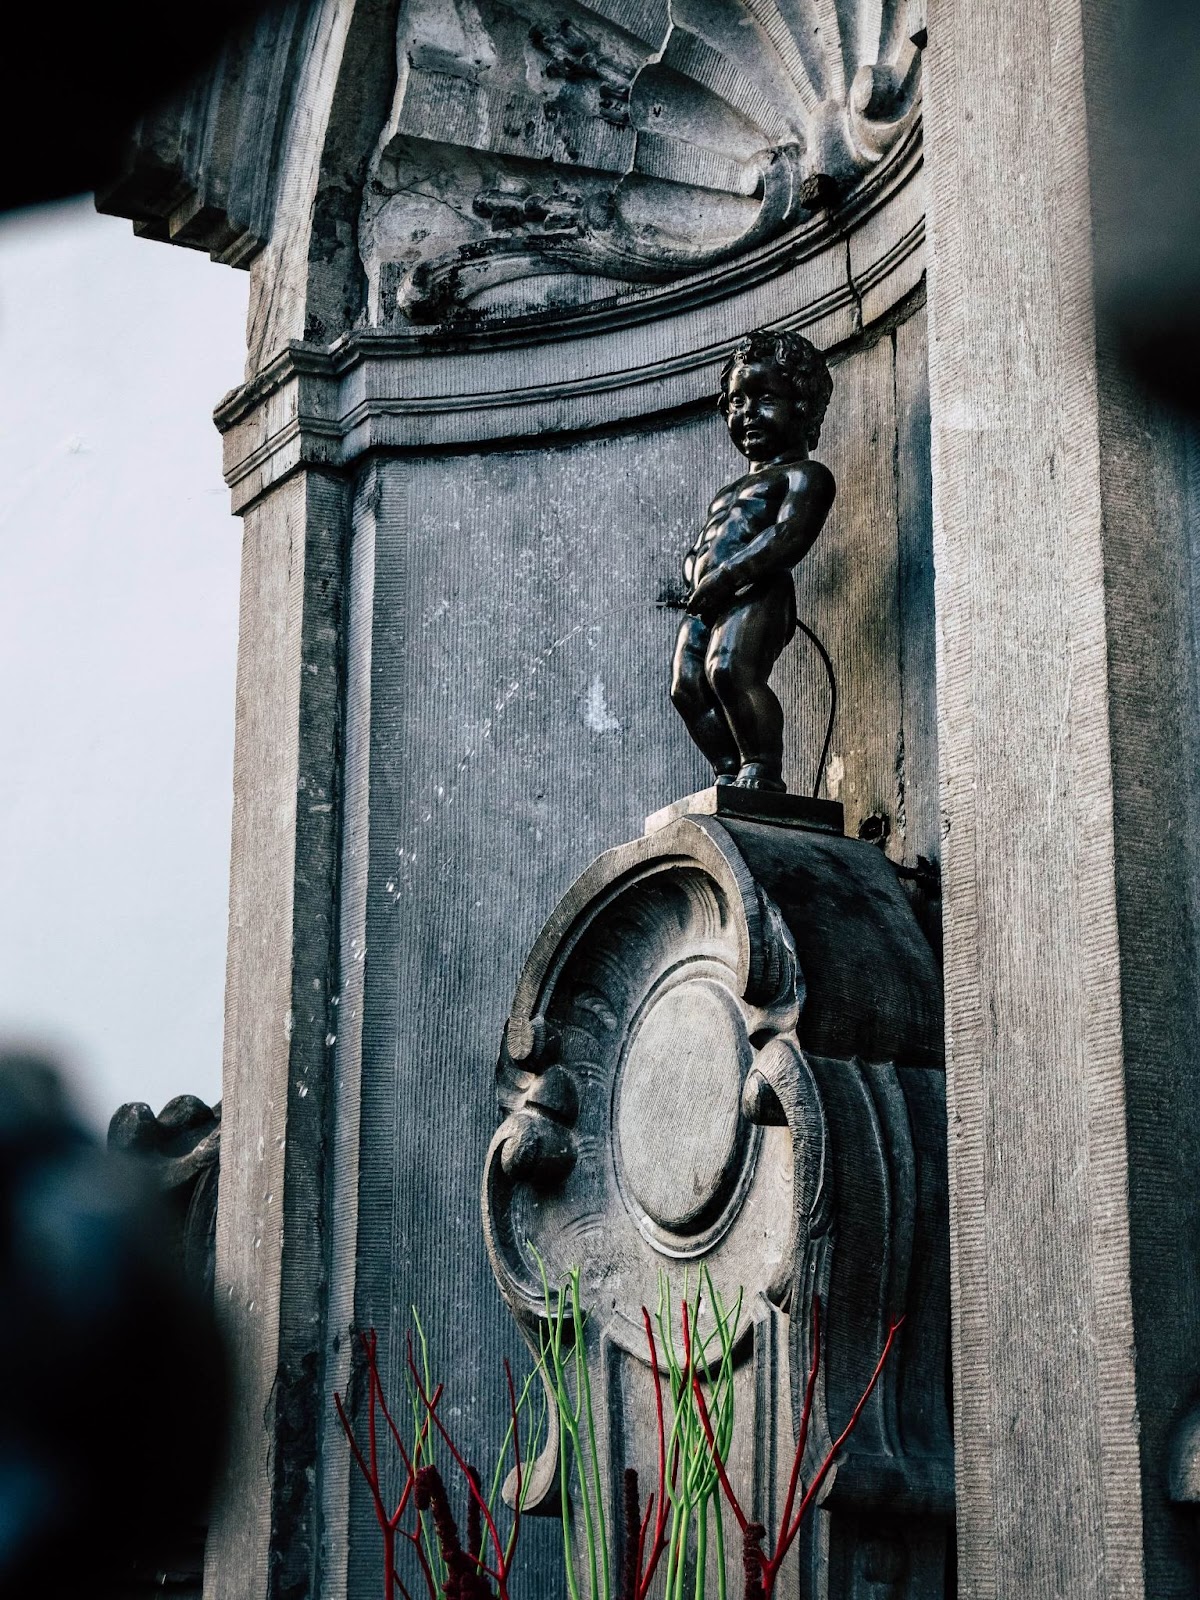 1 day in Brussels, Manneken Pis, small boy peeing into fountain basin, iconic symbol of Brussels